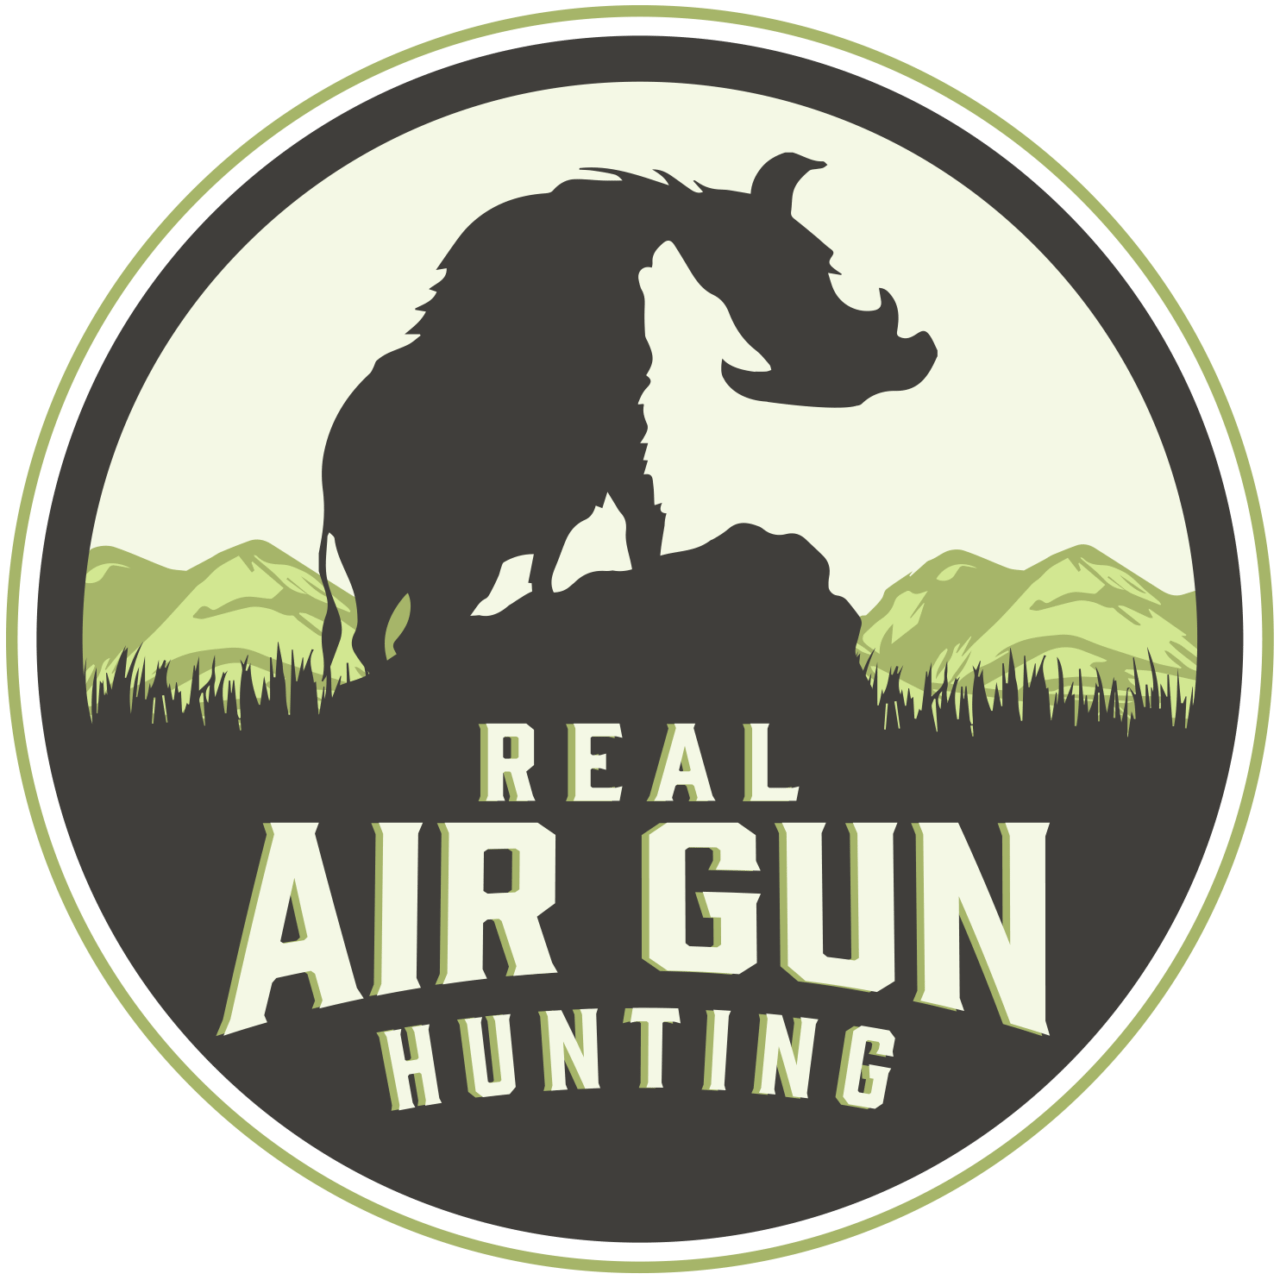 UMAREX USA LAUNCHES NEW SHOW ALL ABOUT AIR GUN HUNTING